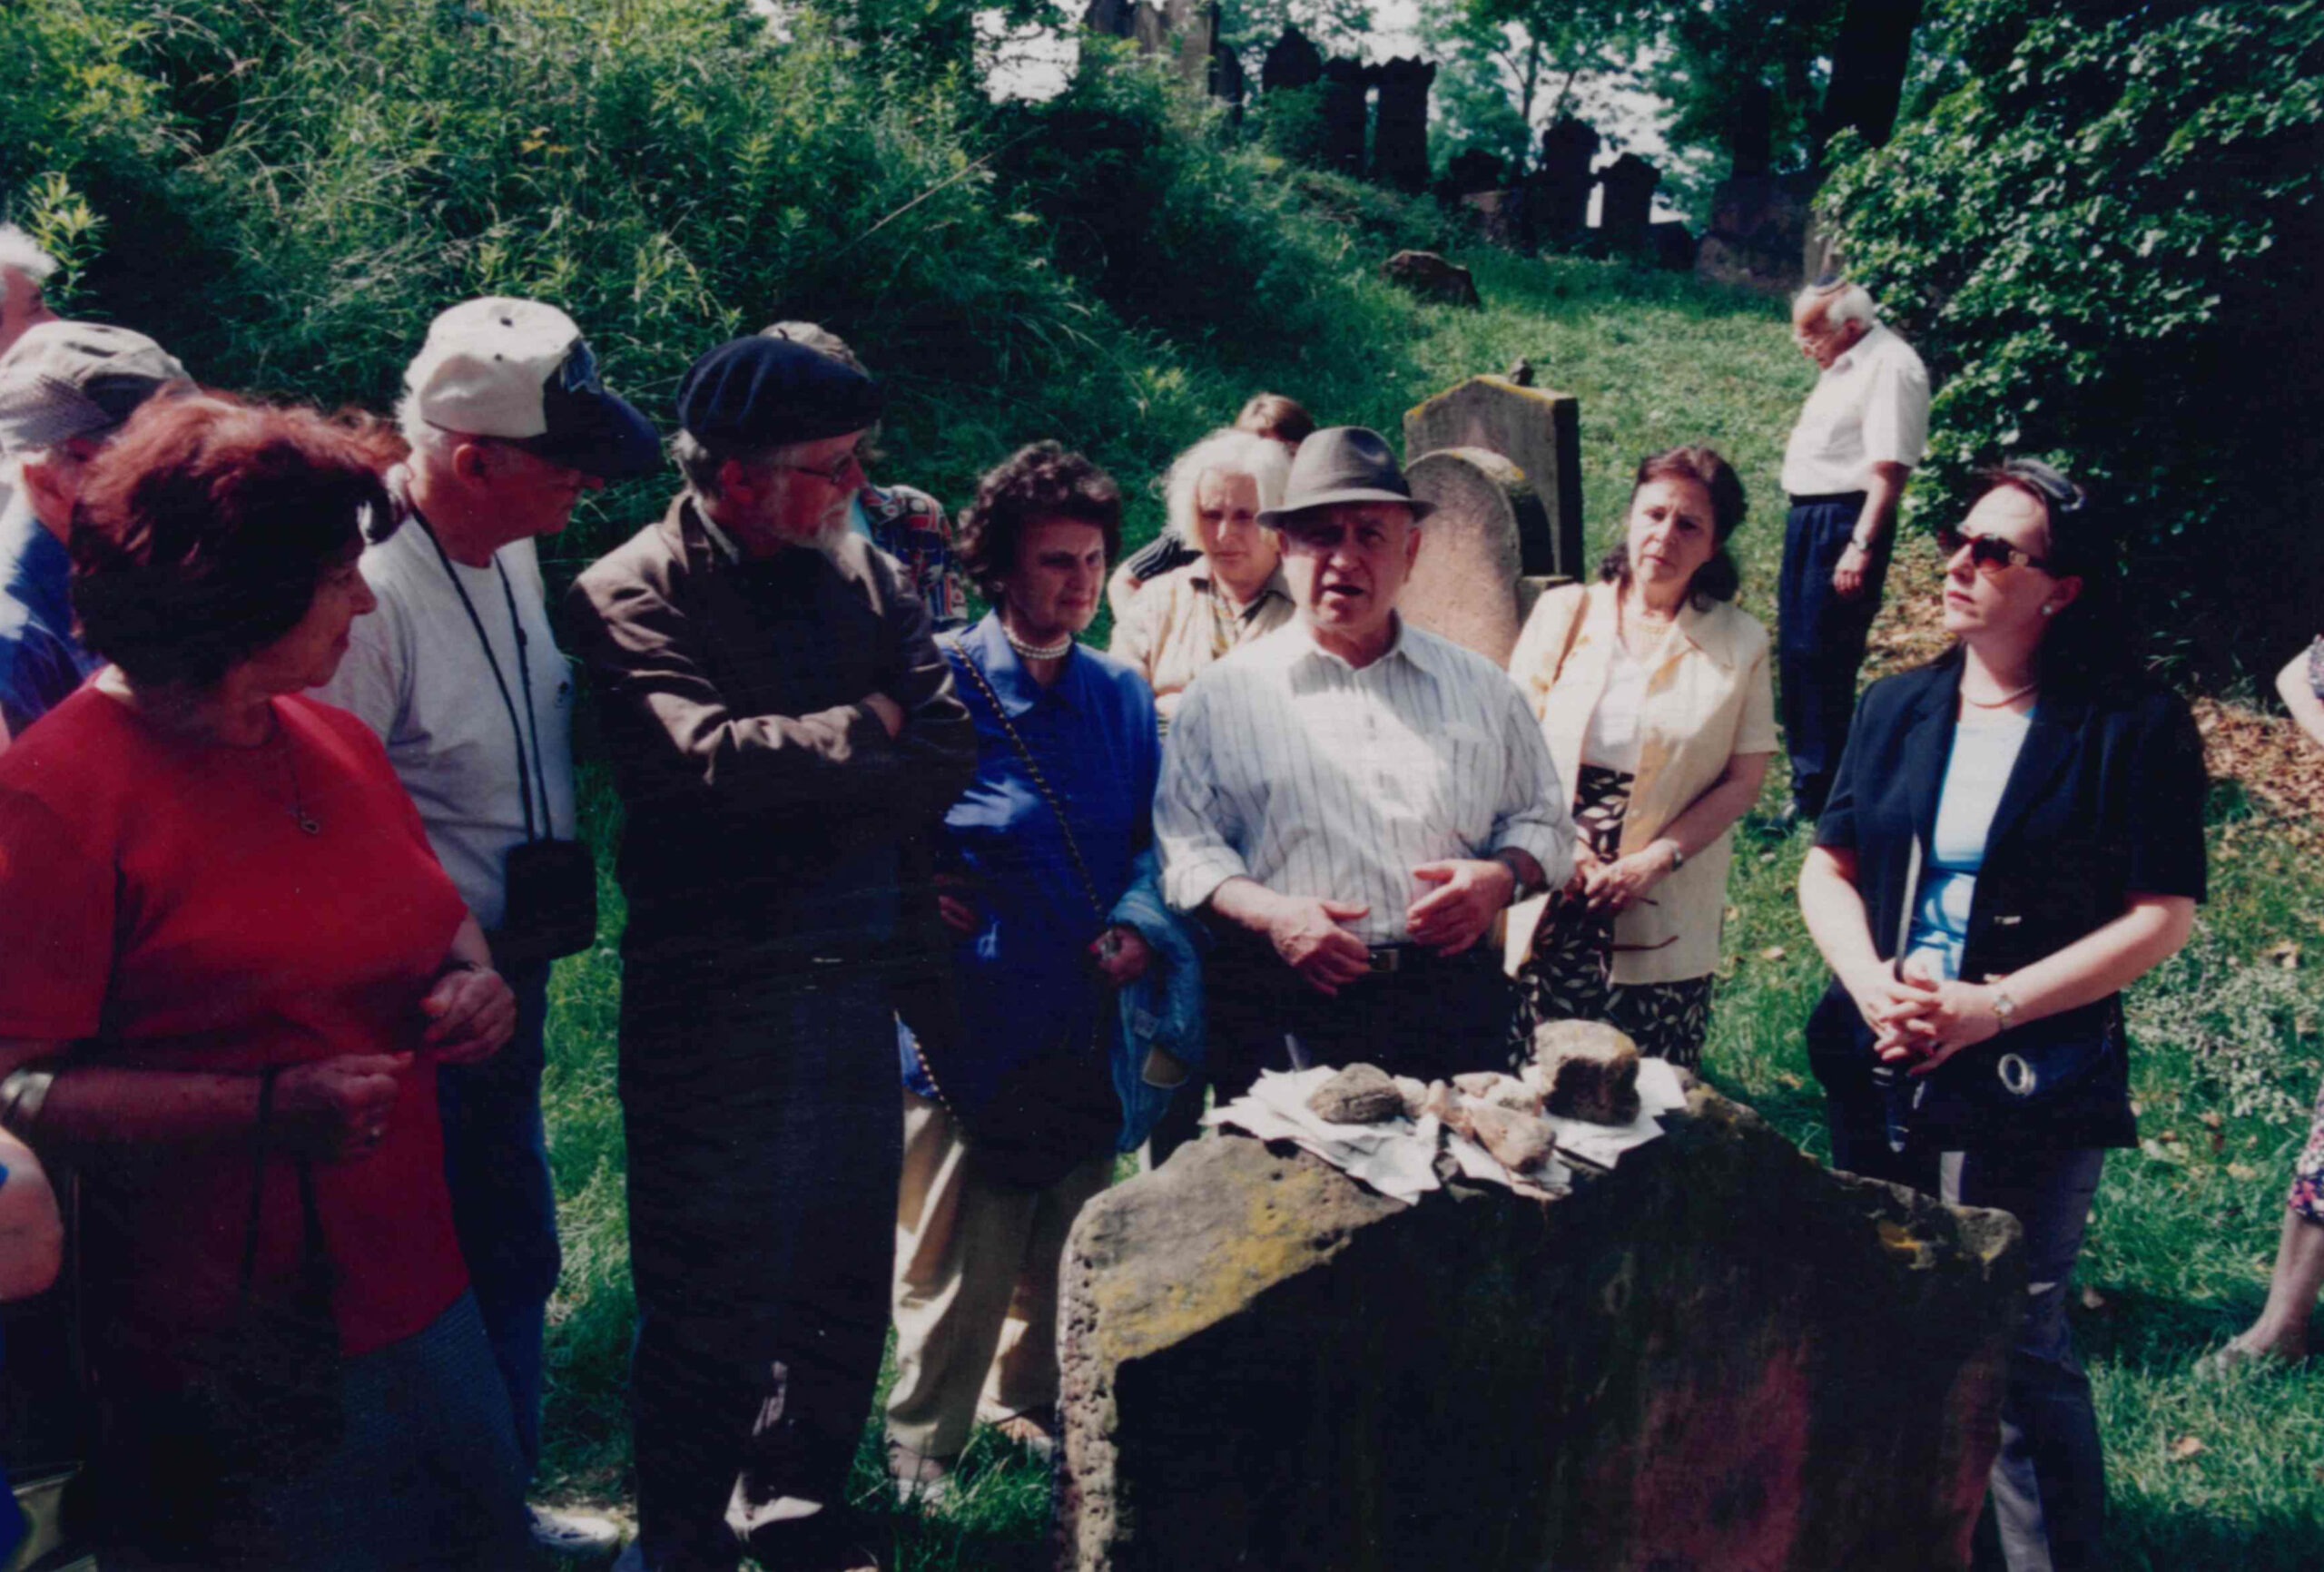 Cantor Avigdor Zuker during a guided tour of the Jewish cemetery in Worms. Collection Jewish Community Wiesbaden